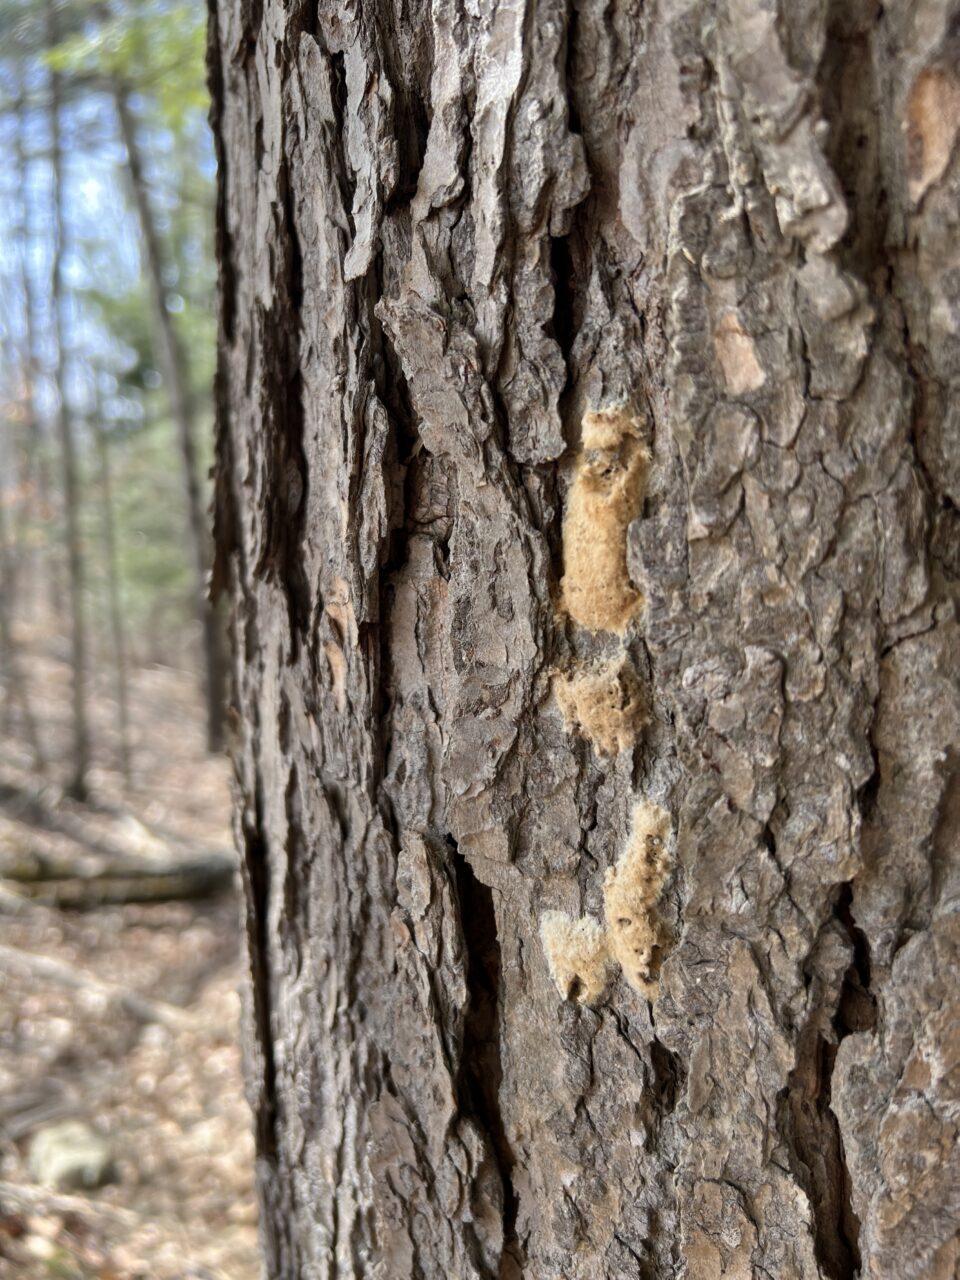 Spongy moth egg sacs on a tree in Bald Eagle State Park